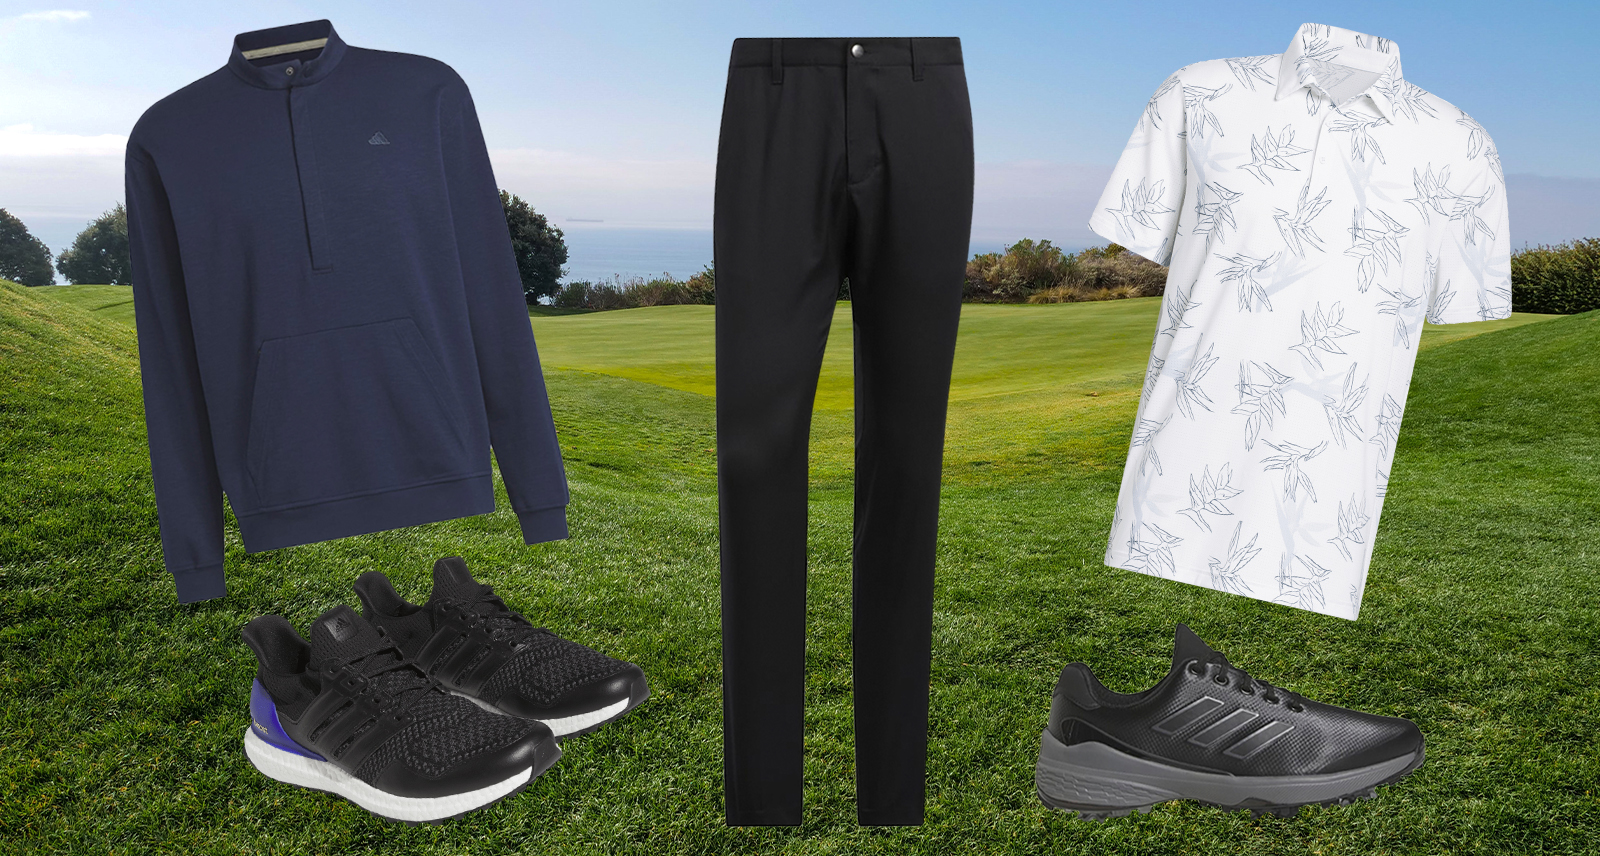 adidas golf-inspired gift guide